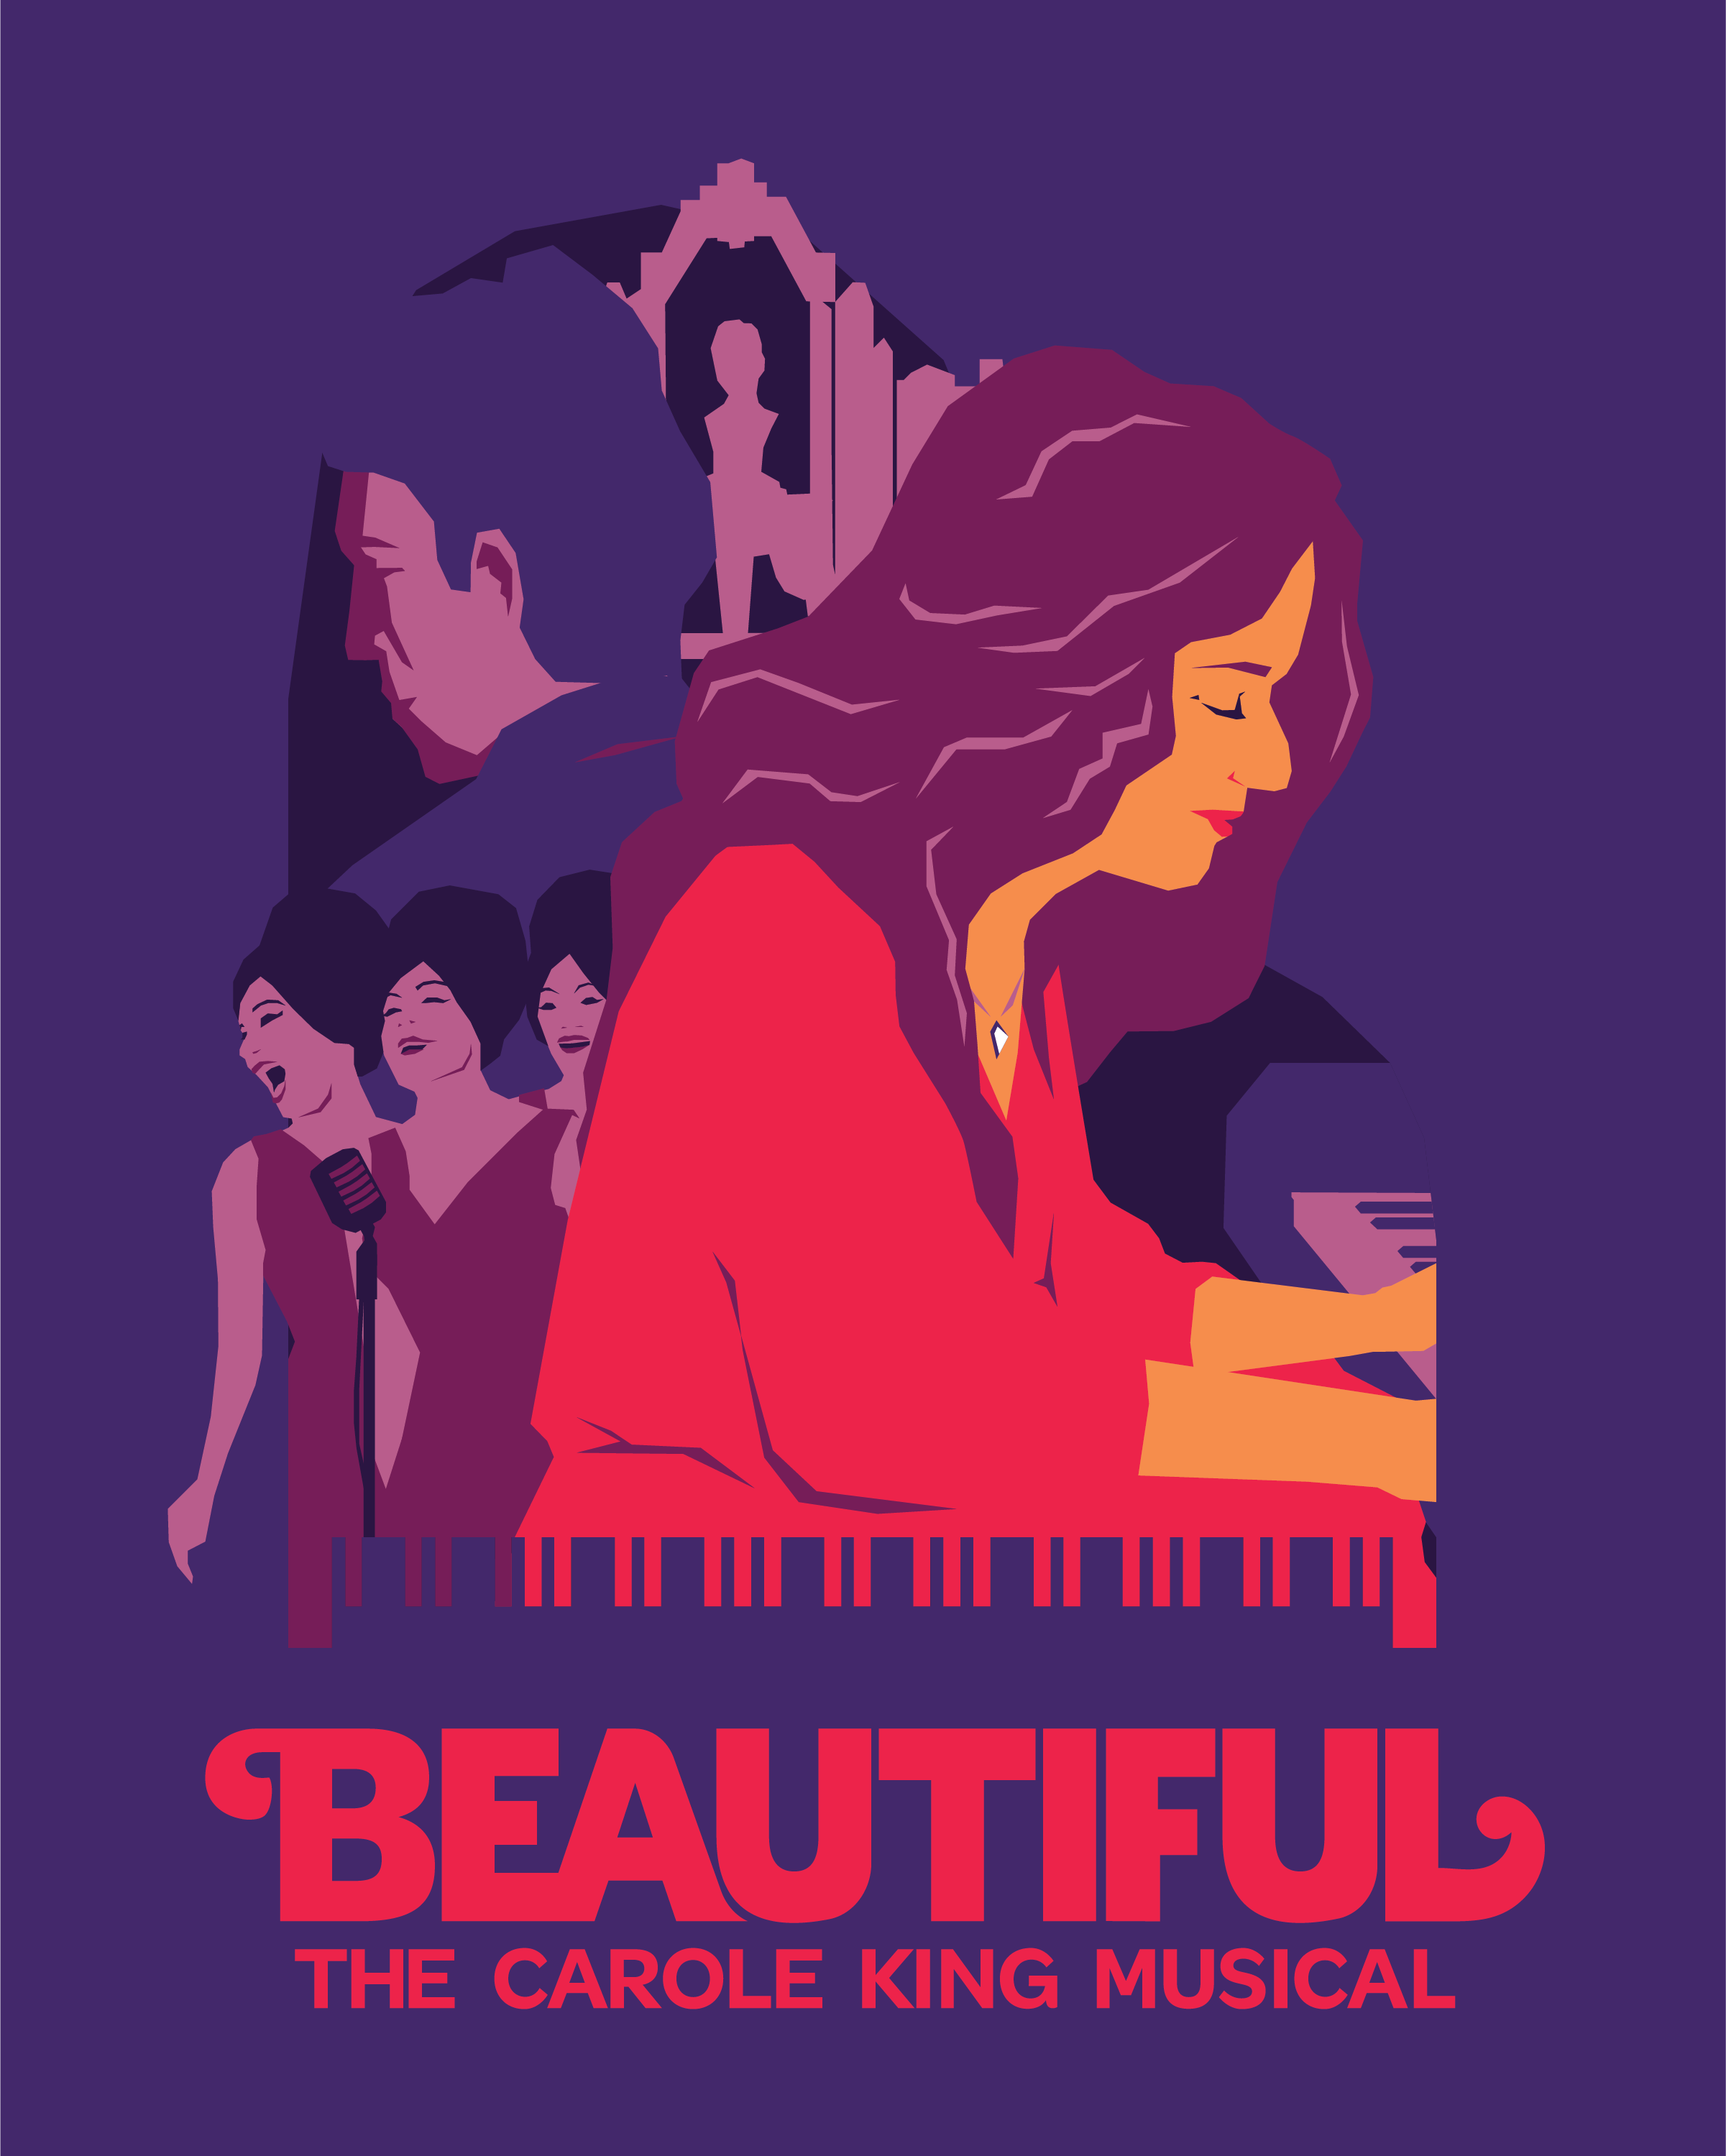 Beautiful: The Carole King Musical - Show Identity and Branding